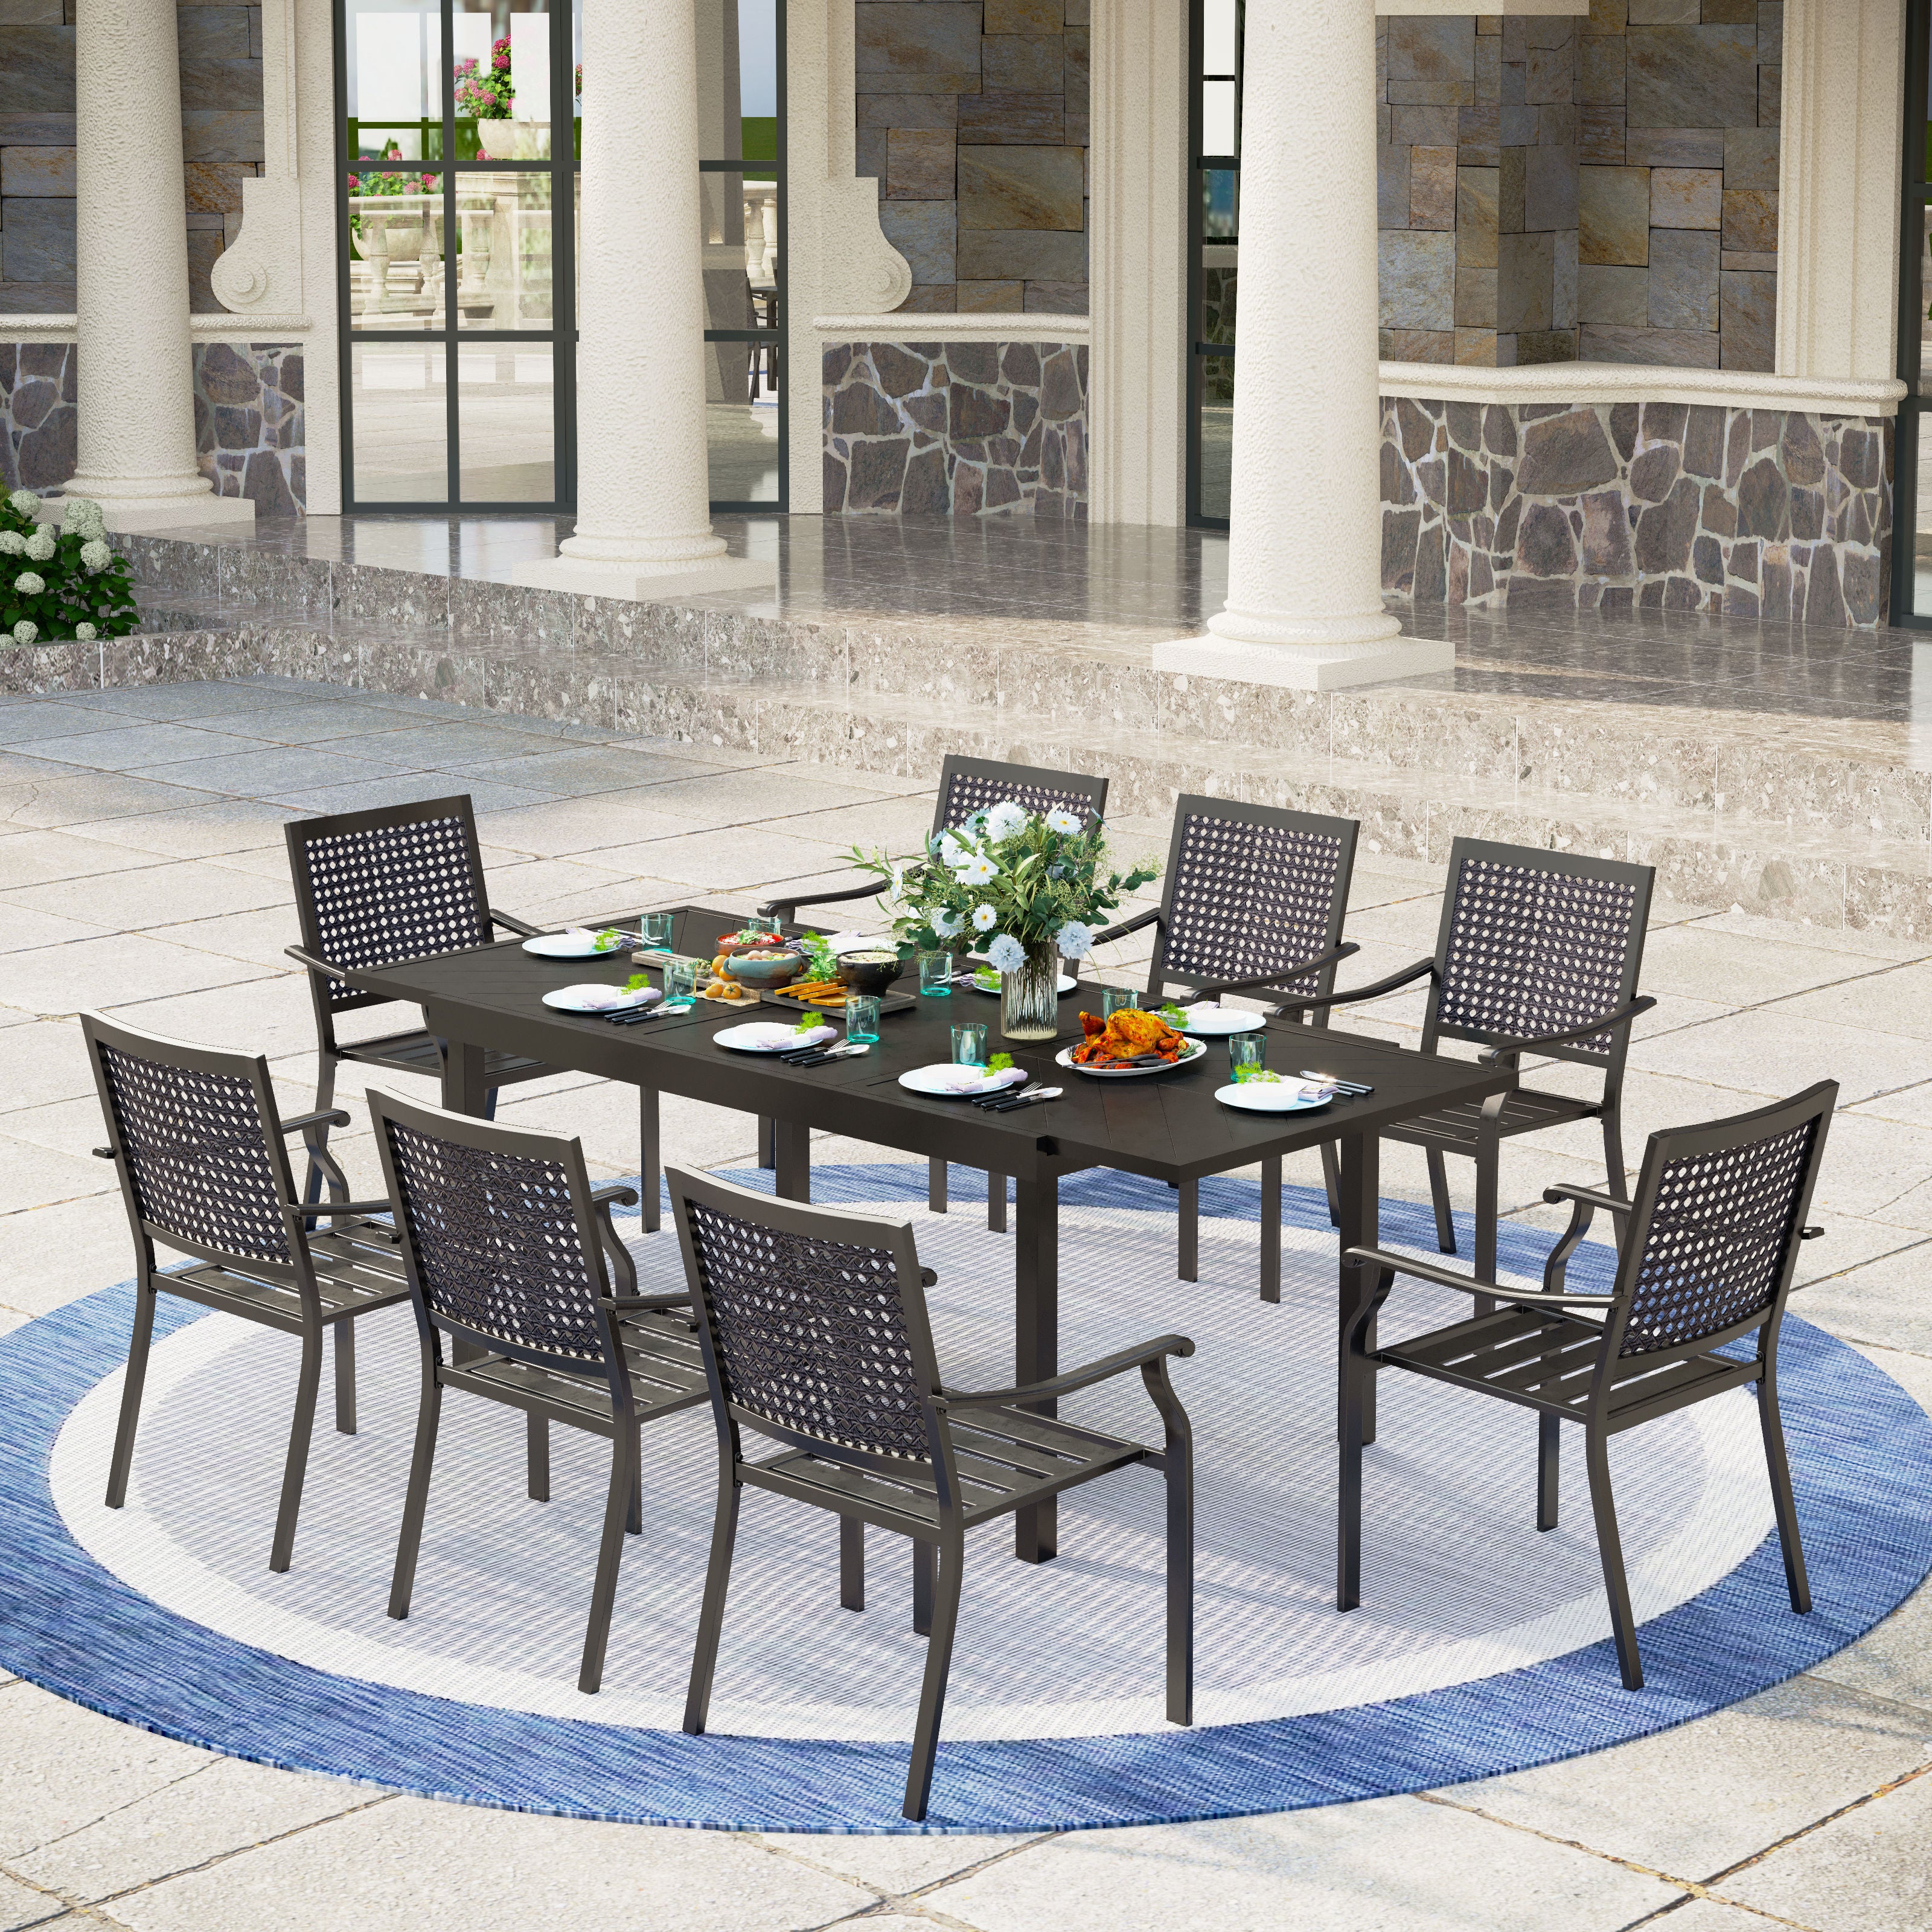 MFSTUDIO 9/7-Piece Patio Dining Set Line-curved Extendable Table & Fixed Stackable Chairs